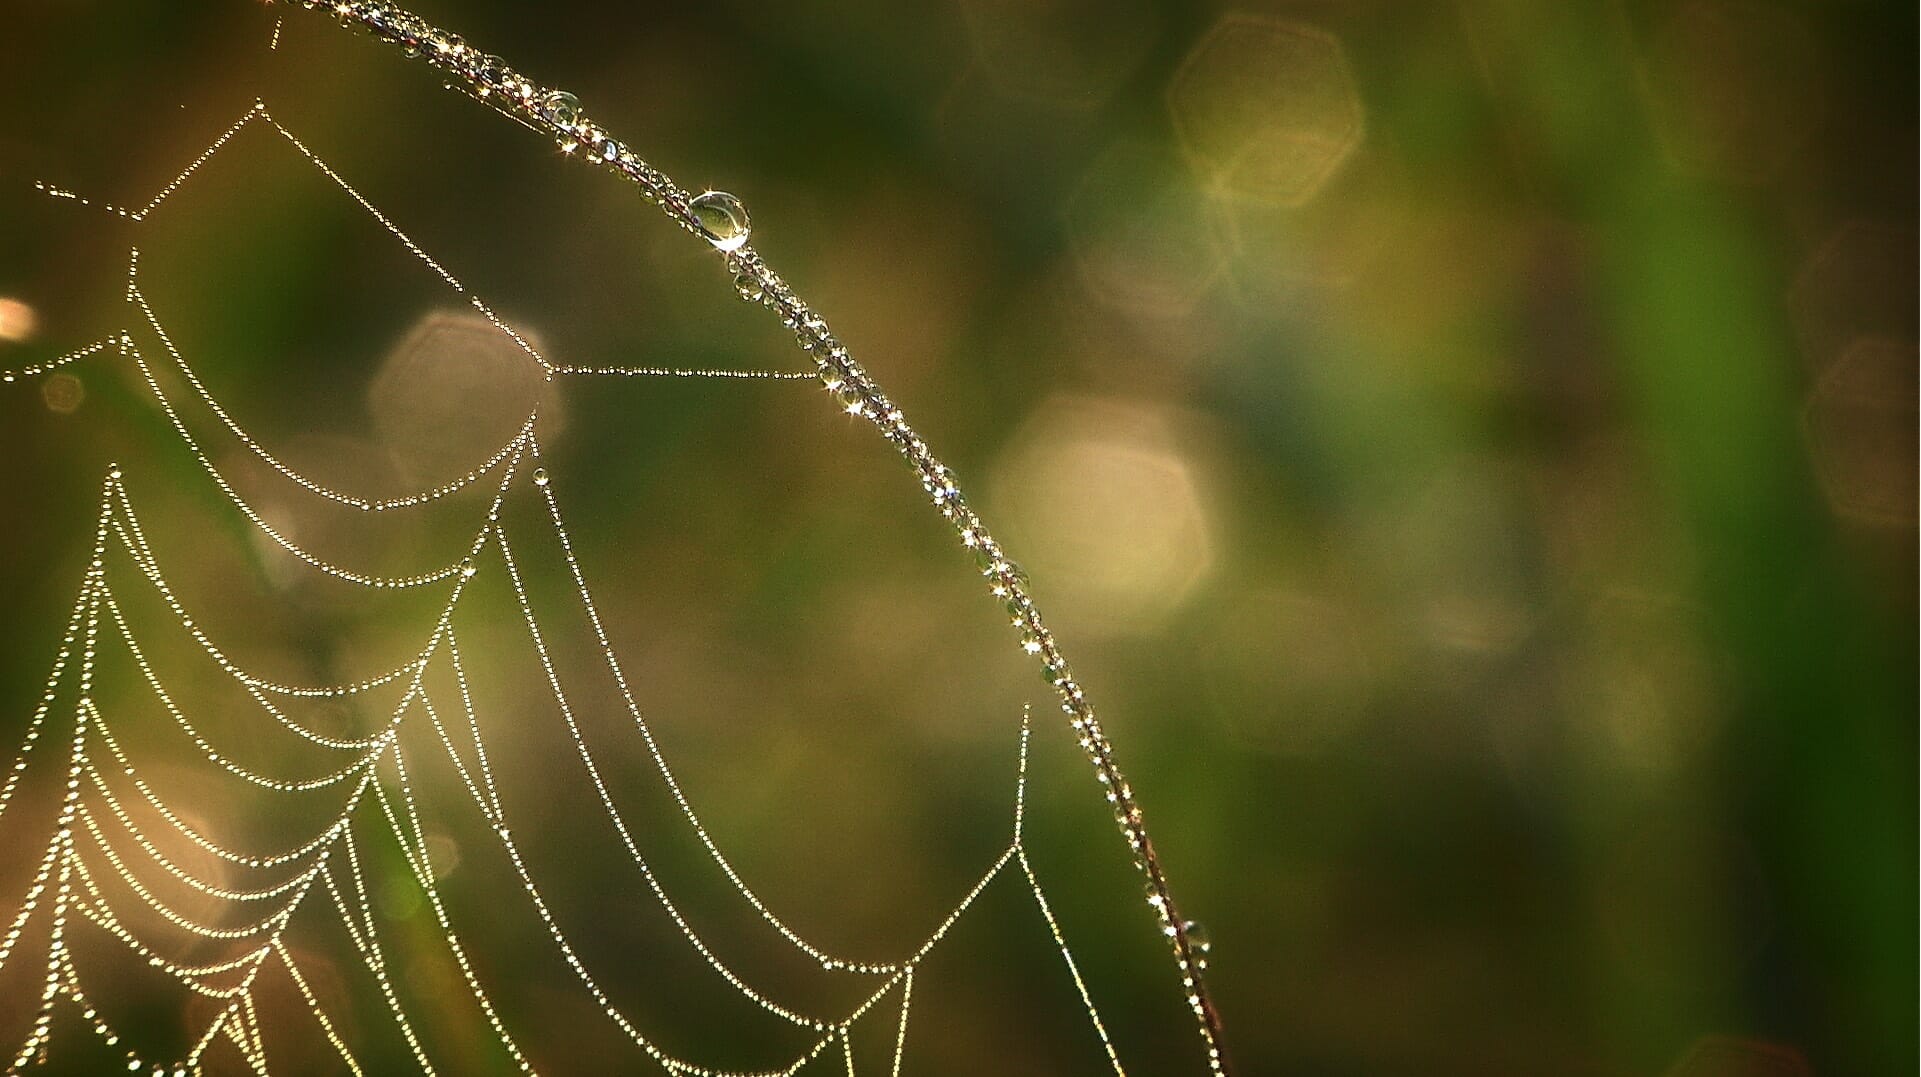 Dew covered Spider web